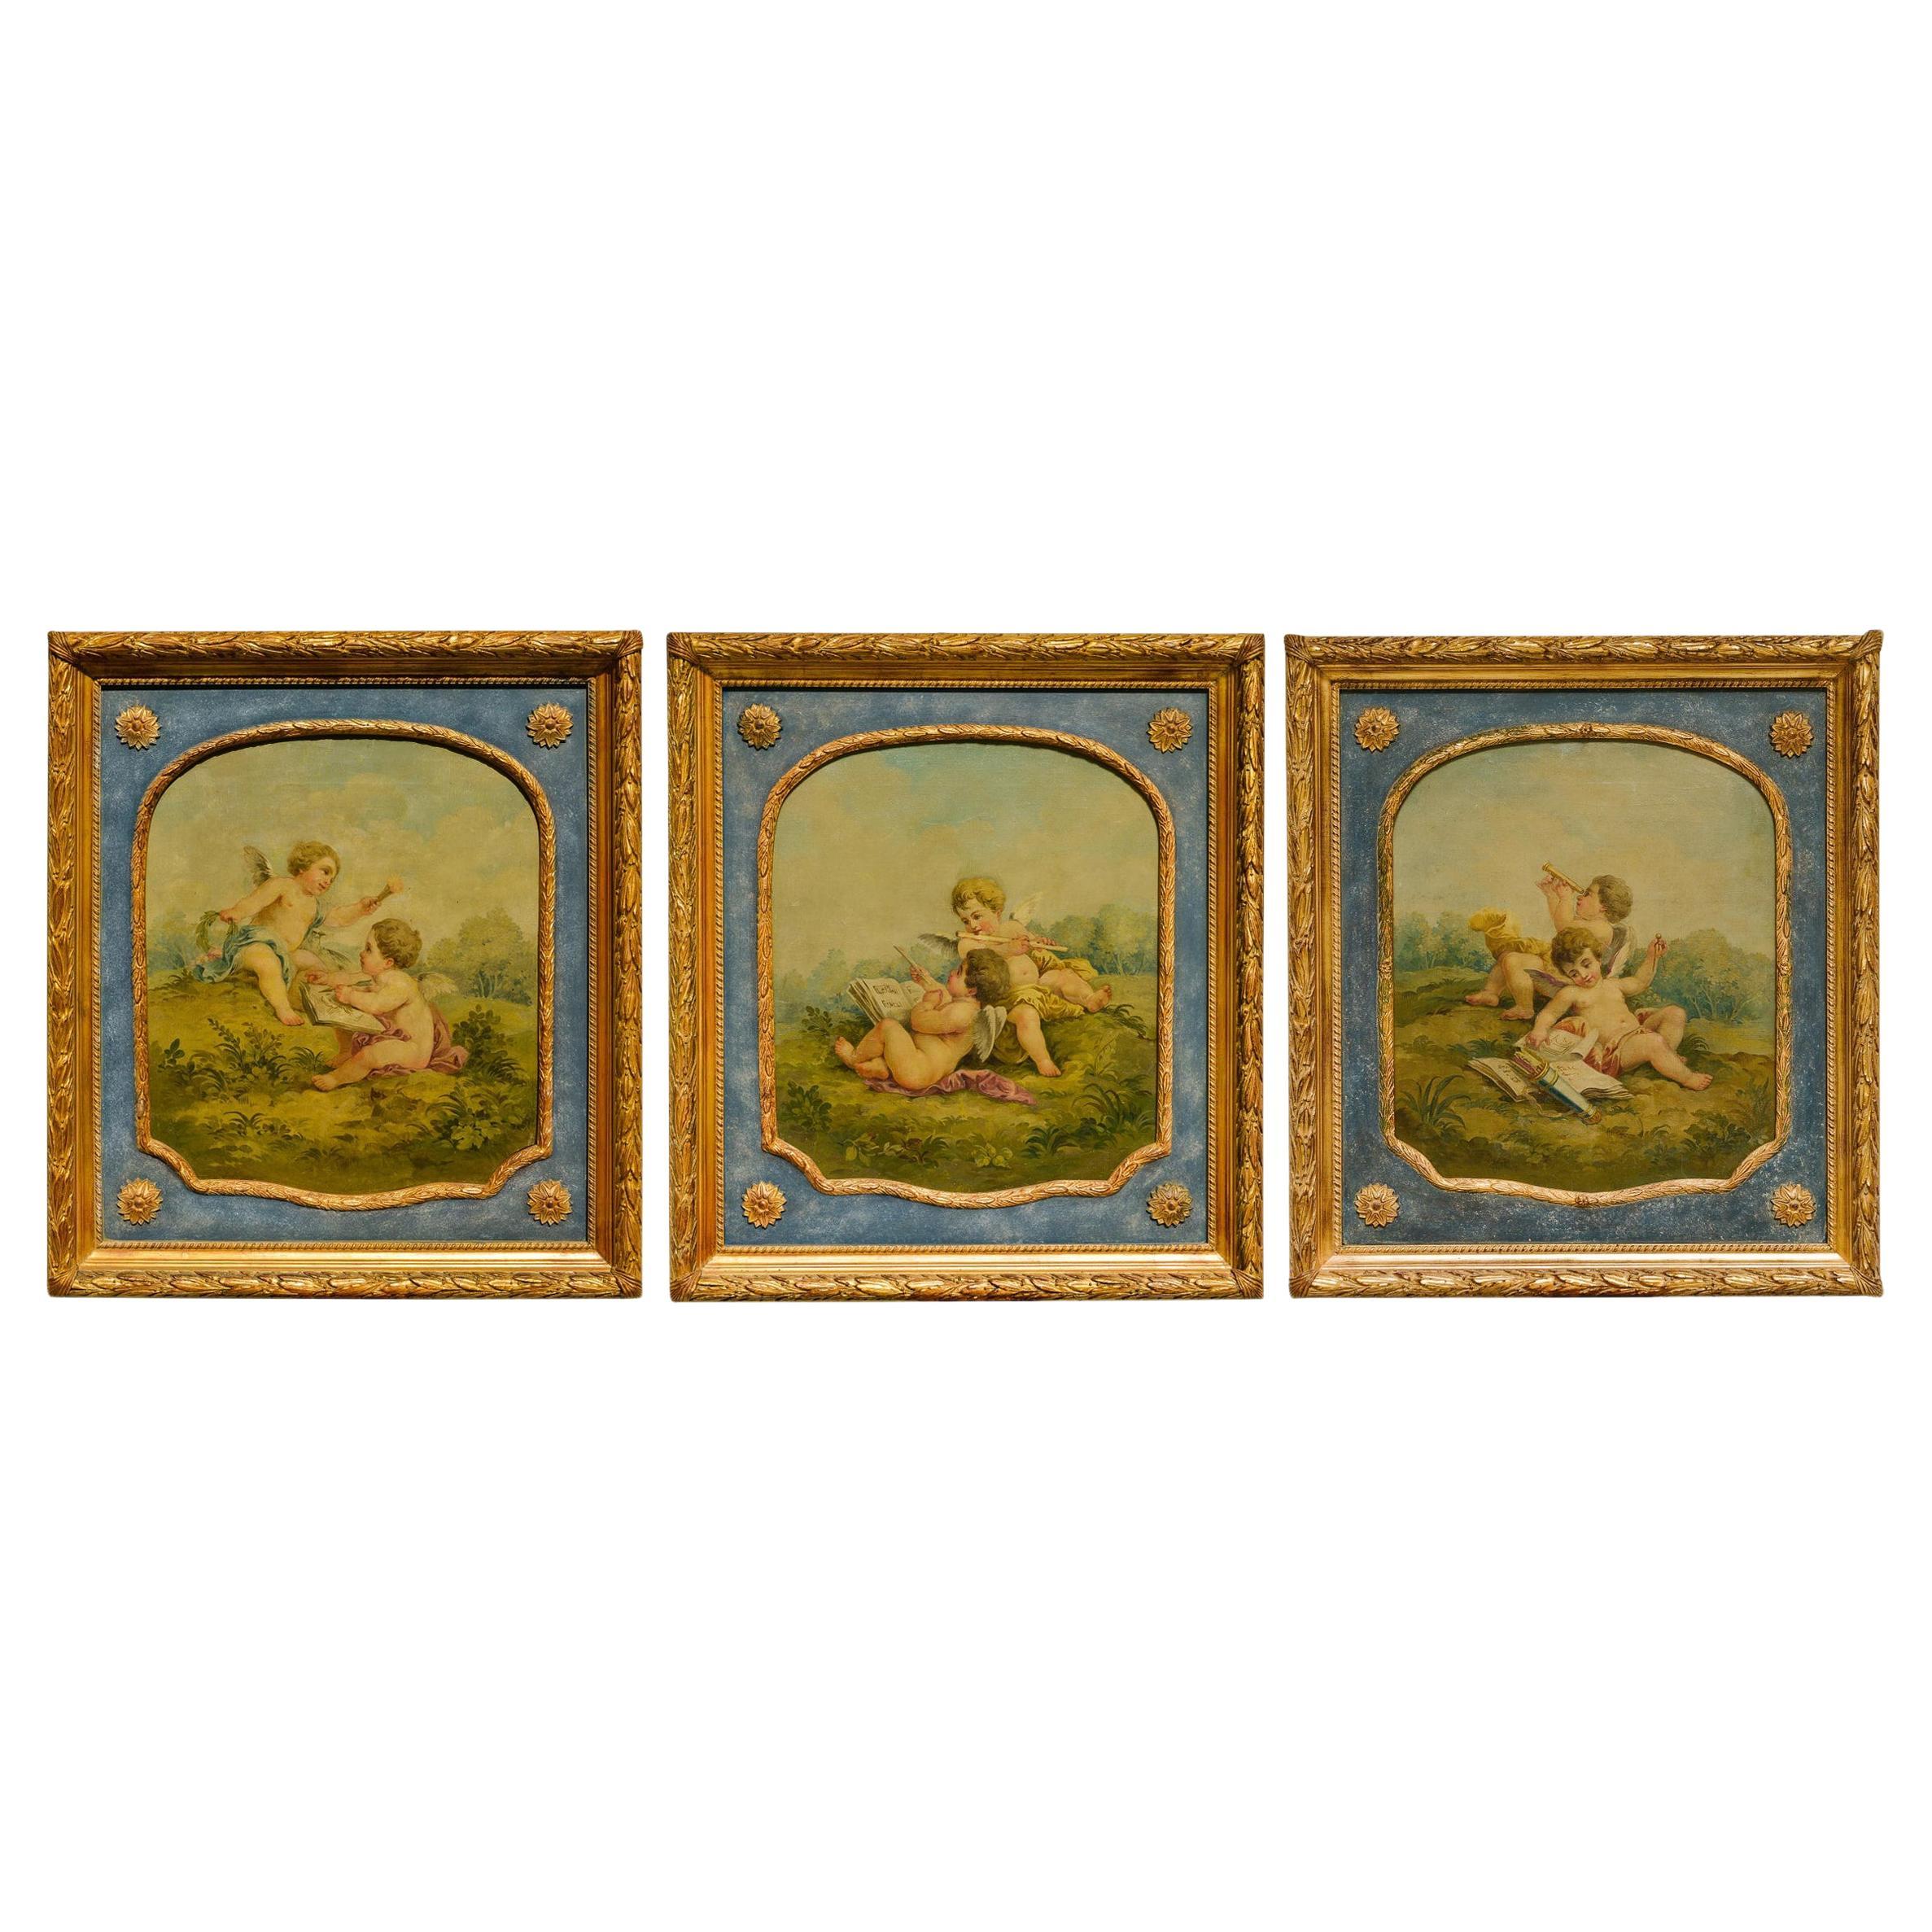 Rare Set of Three Paintings with Putti from Aubusson Tapestry School  For Sale